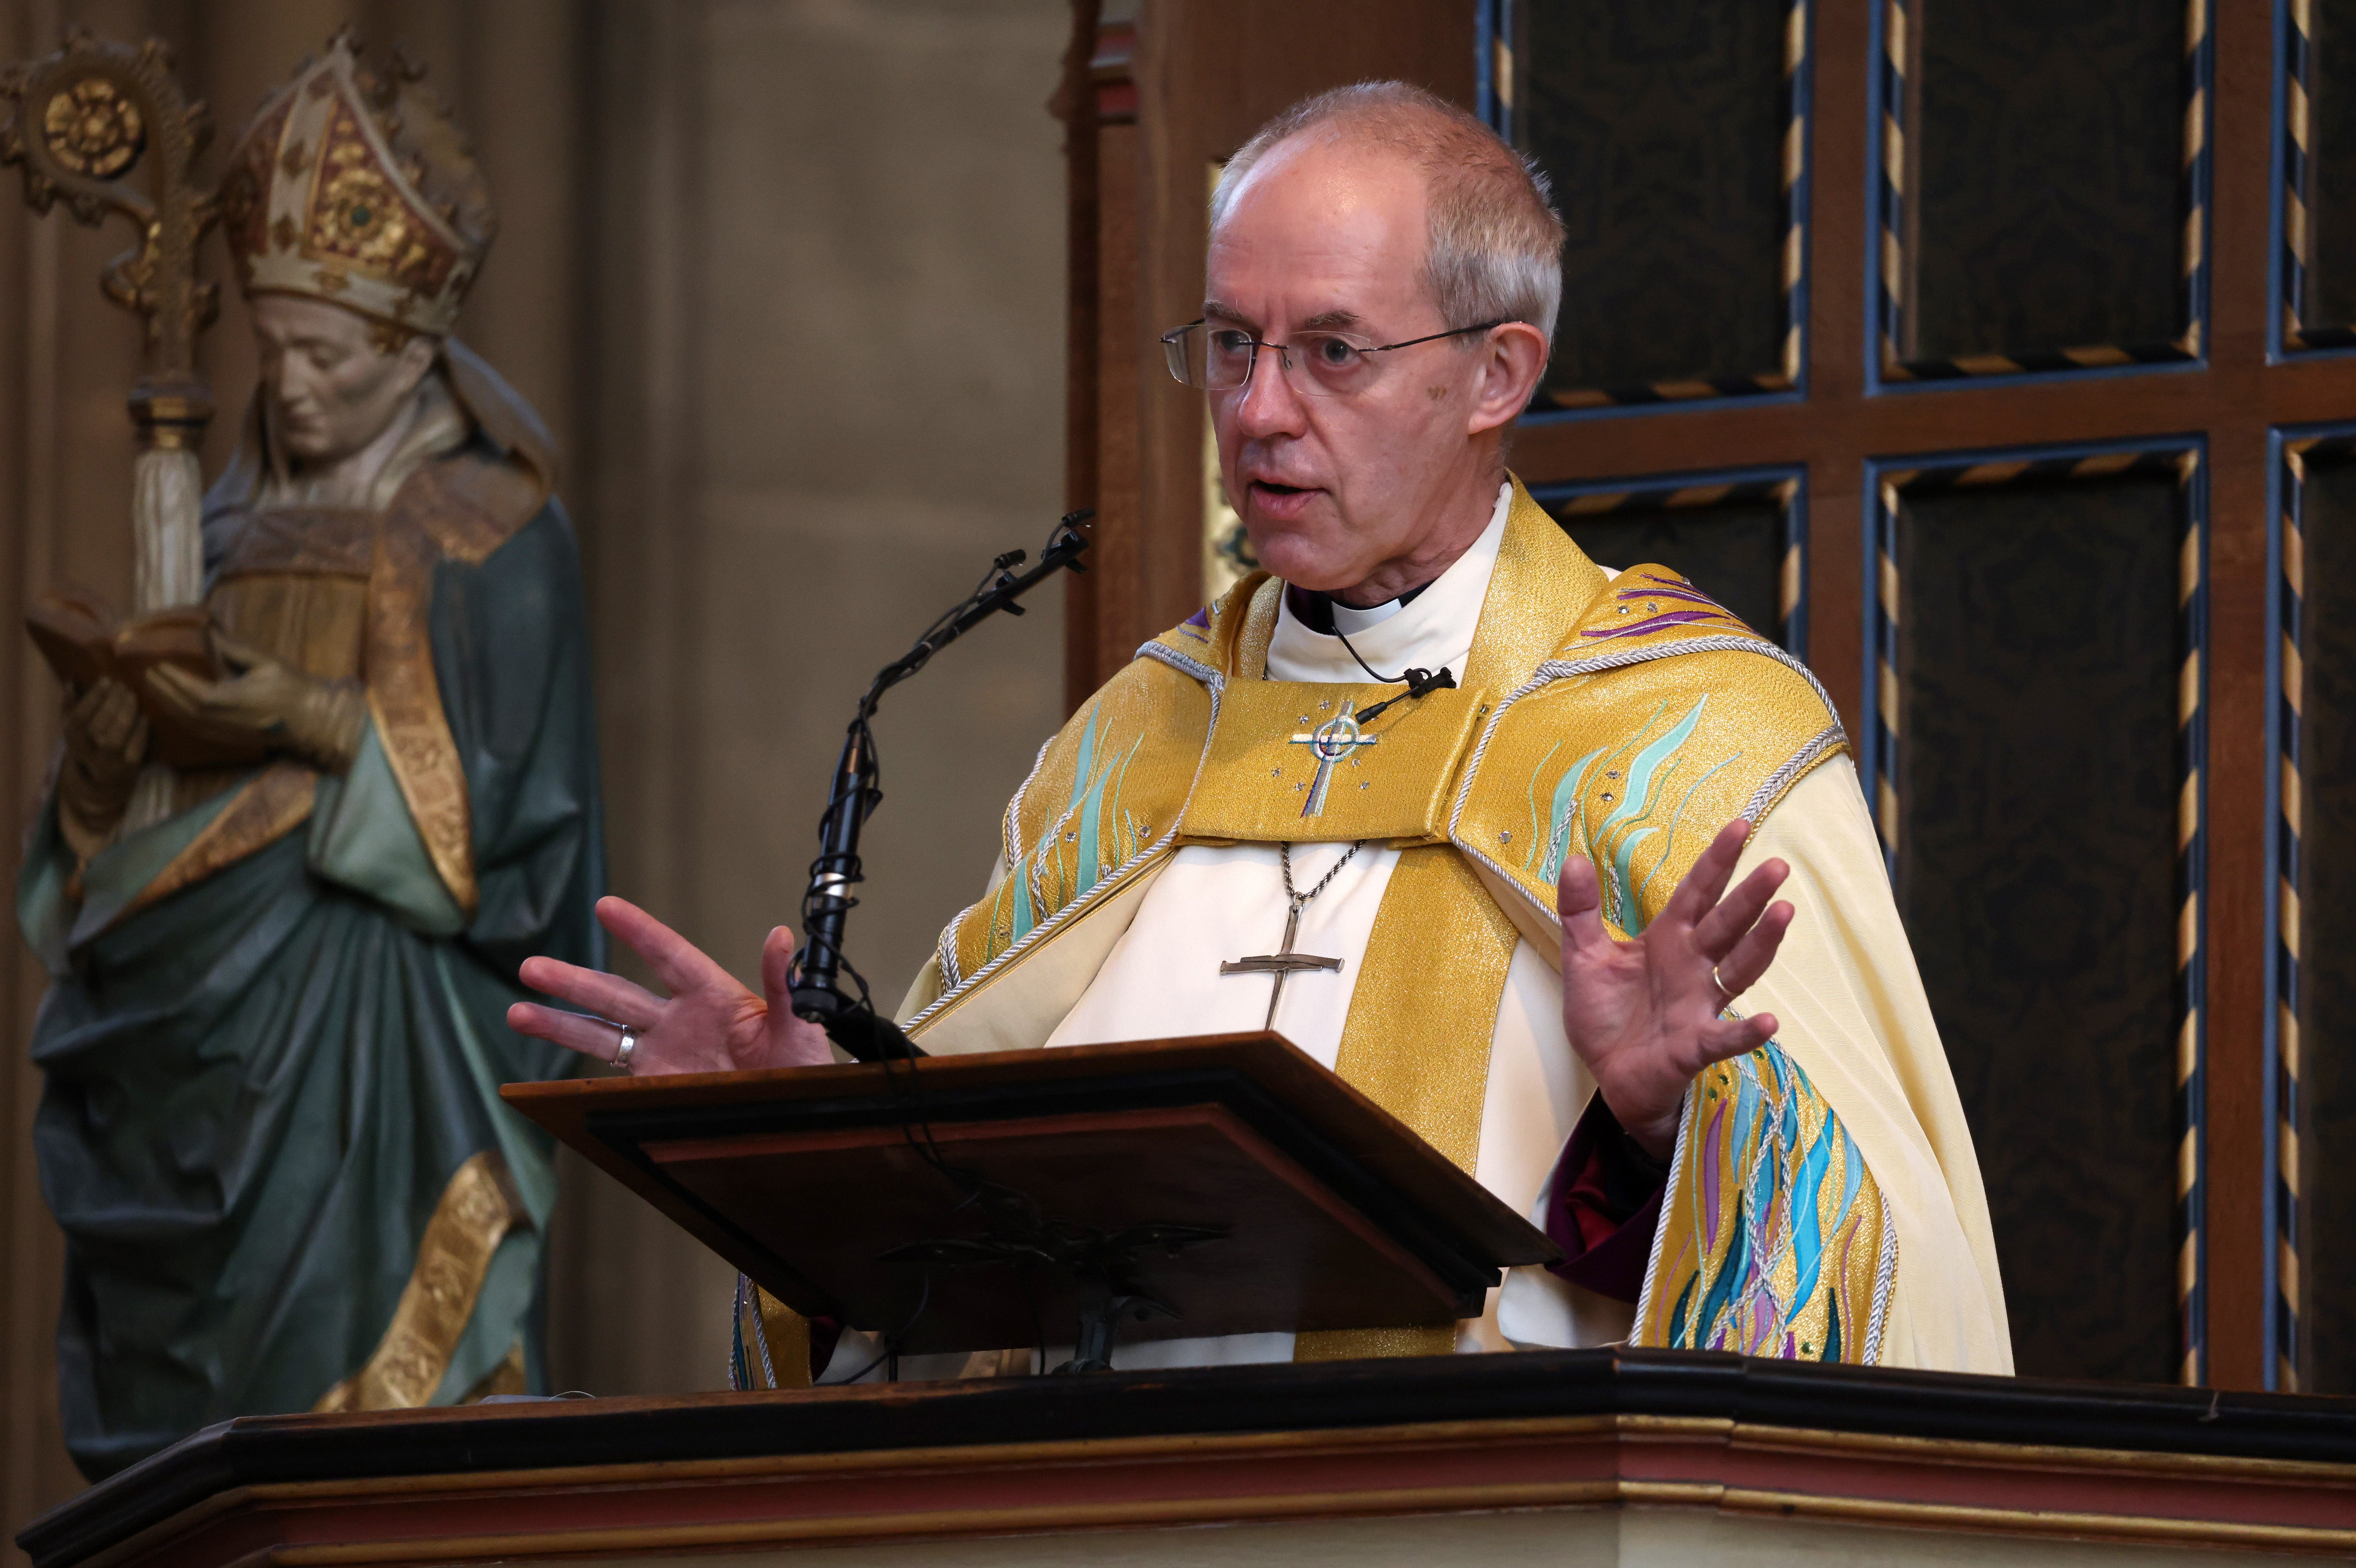 Justin Welby: ‘The principle must stand the judgement of God, and it cannot’